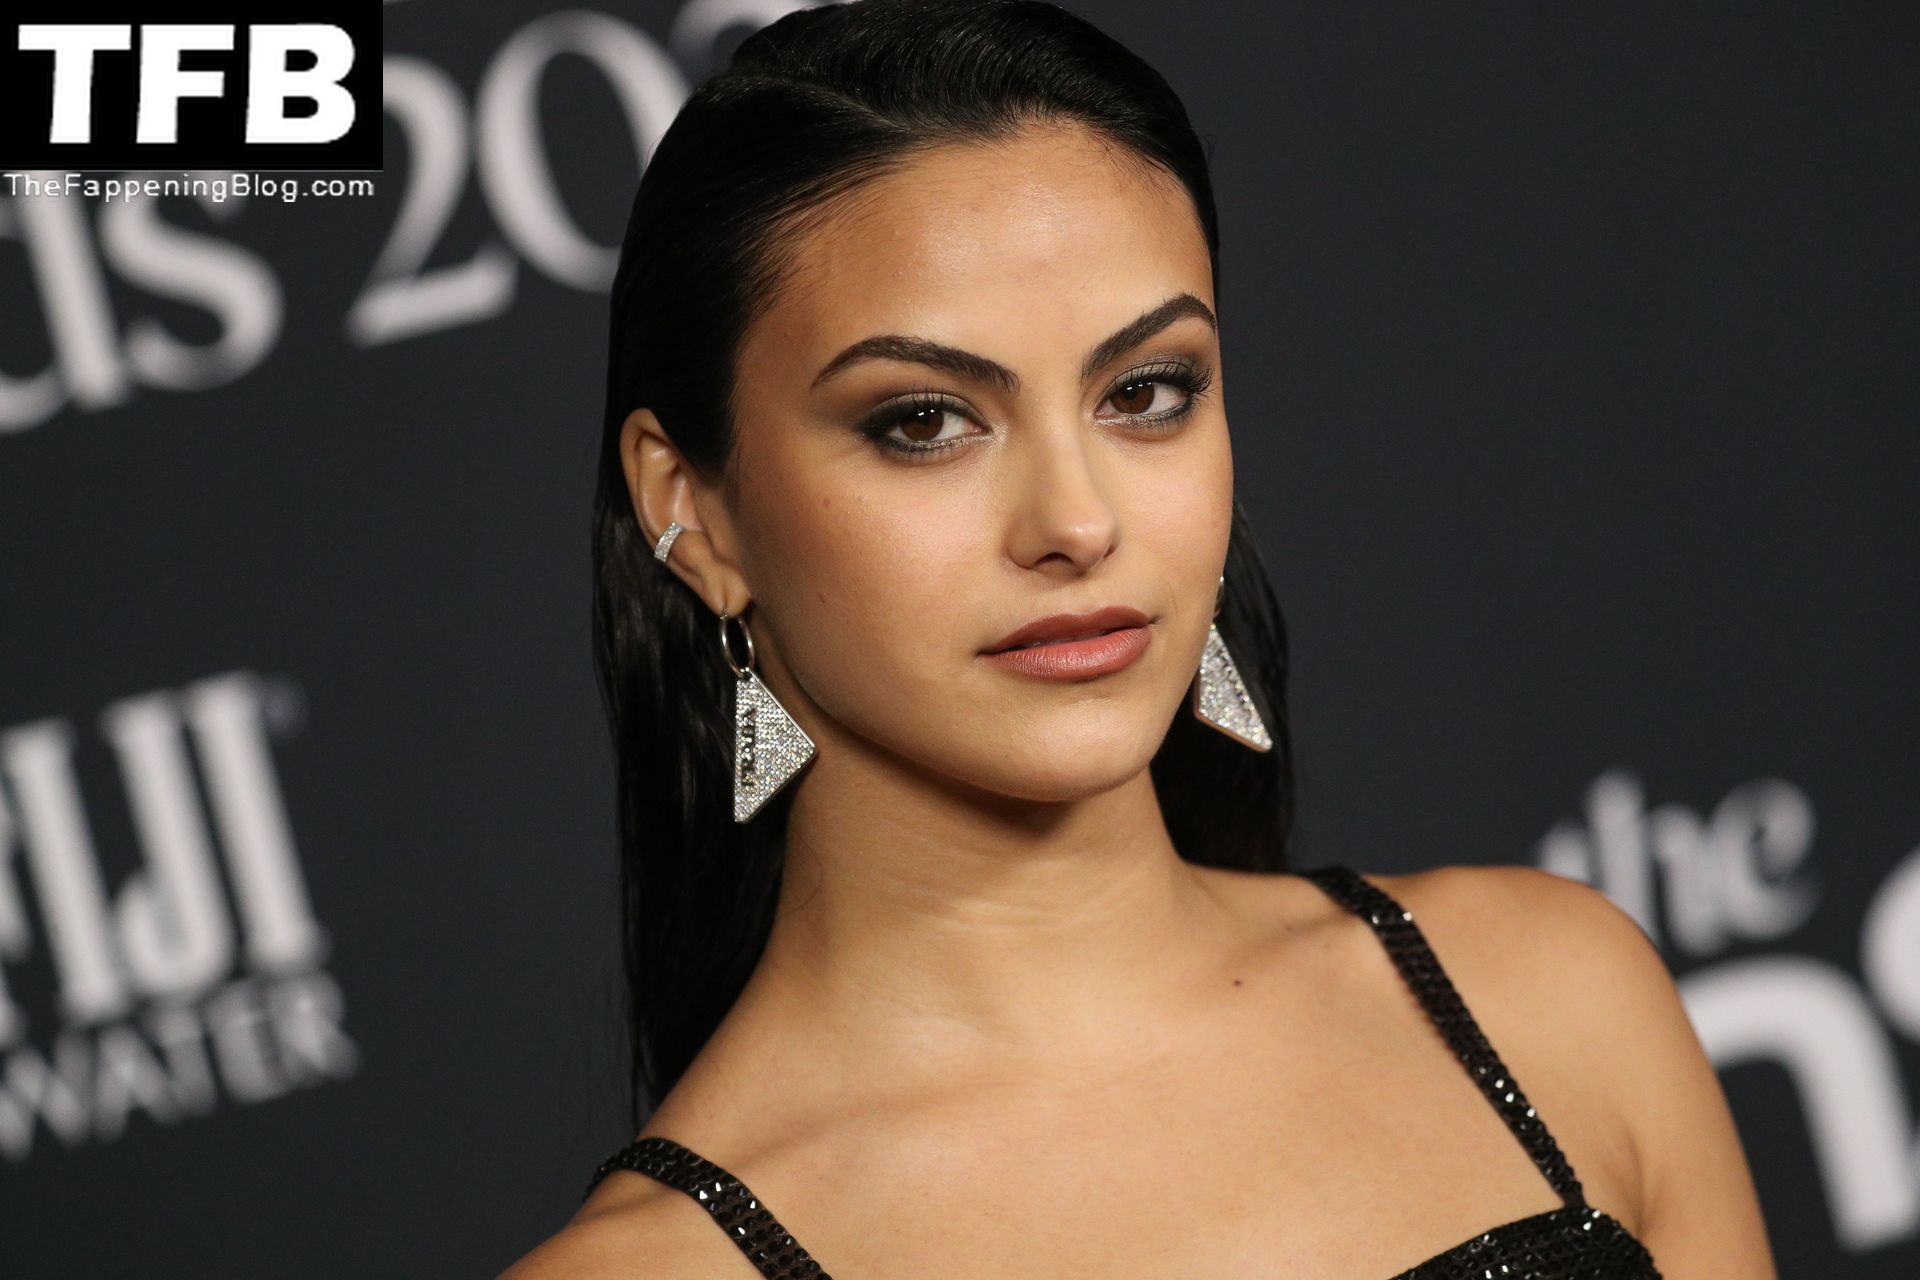 Camila-Mendes-See-Through-Tits-The-Fappening-Blog-85.jpg